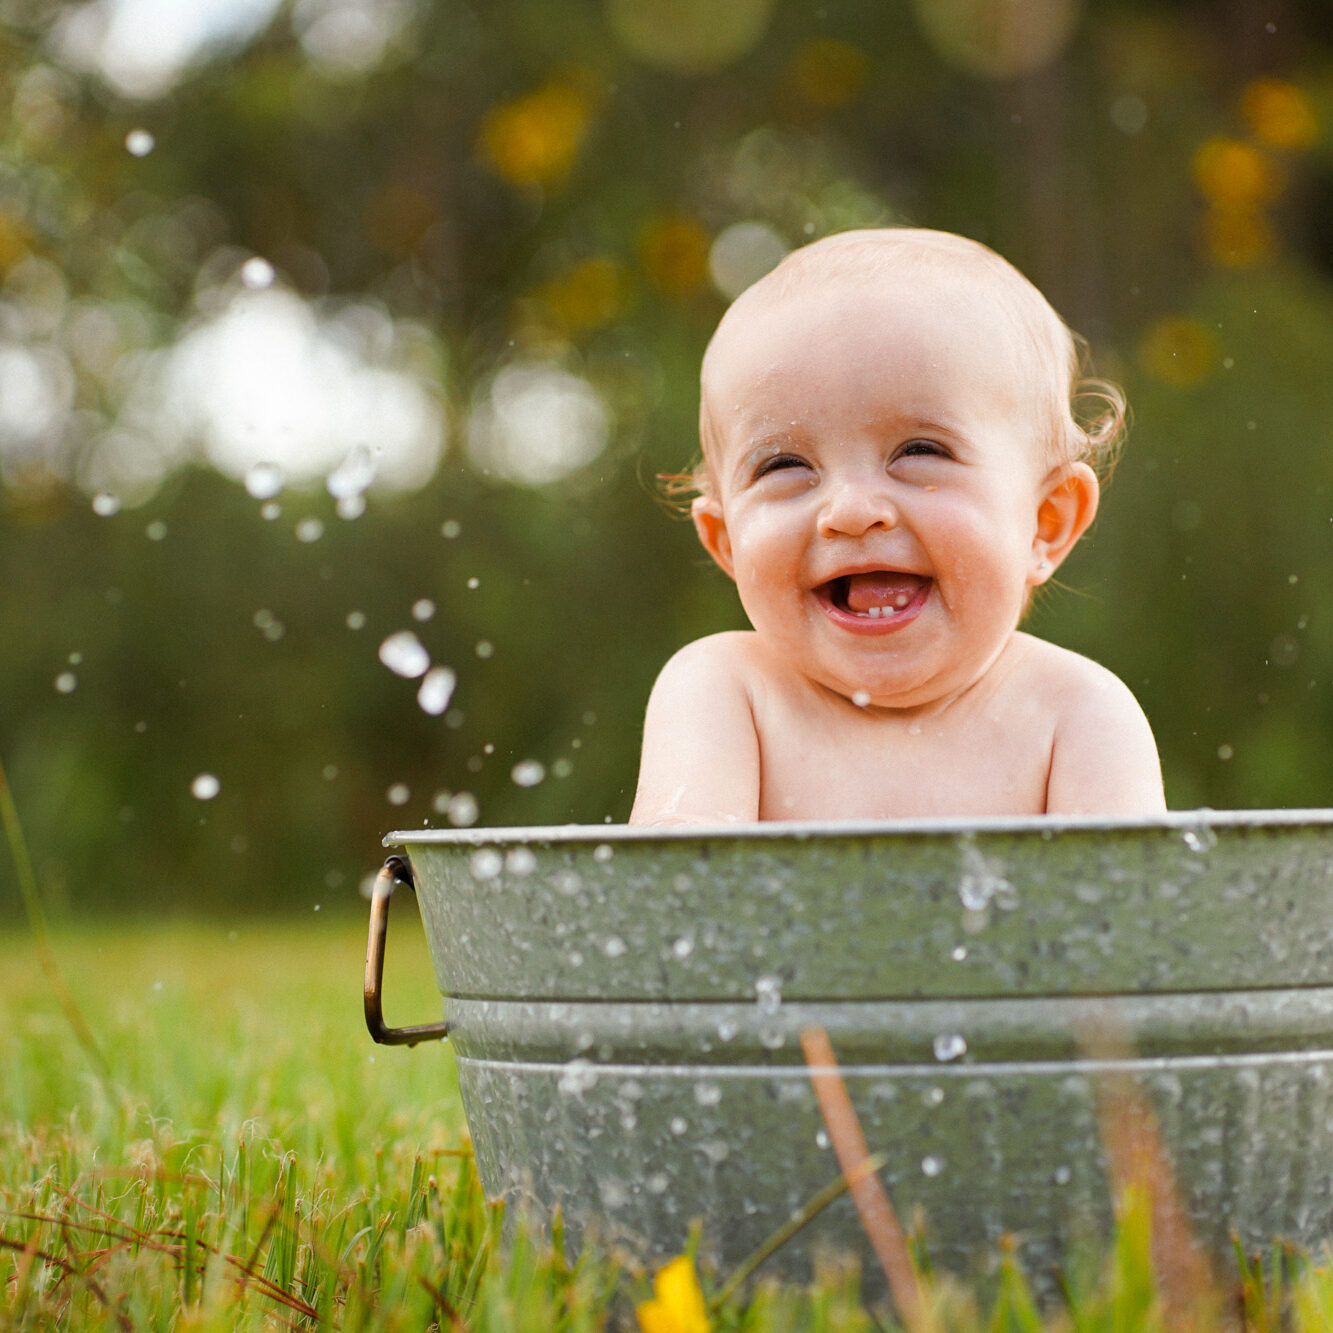 A baby is playing in a bucket of water.